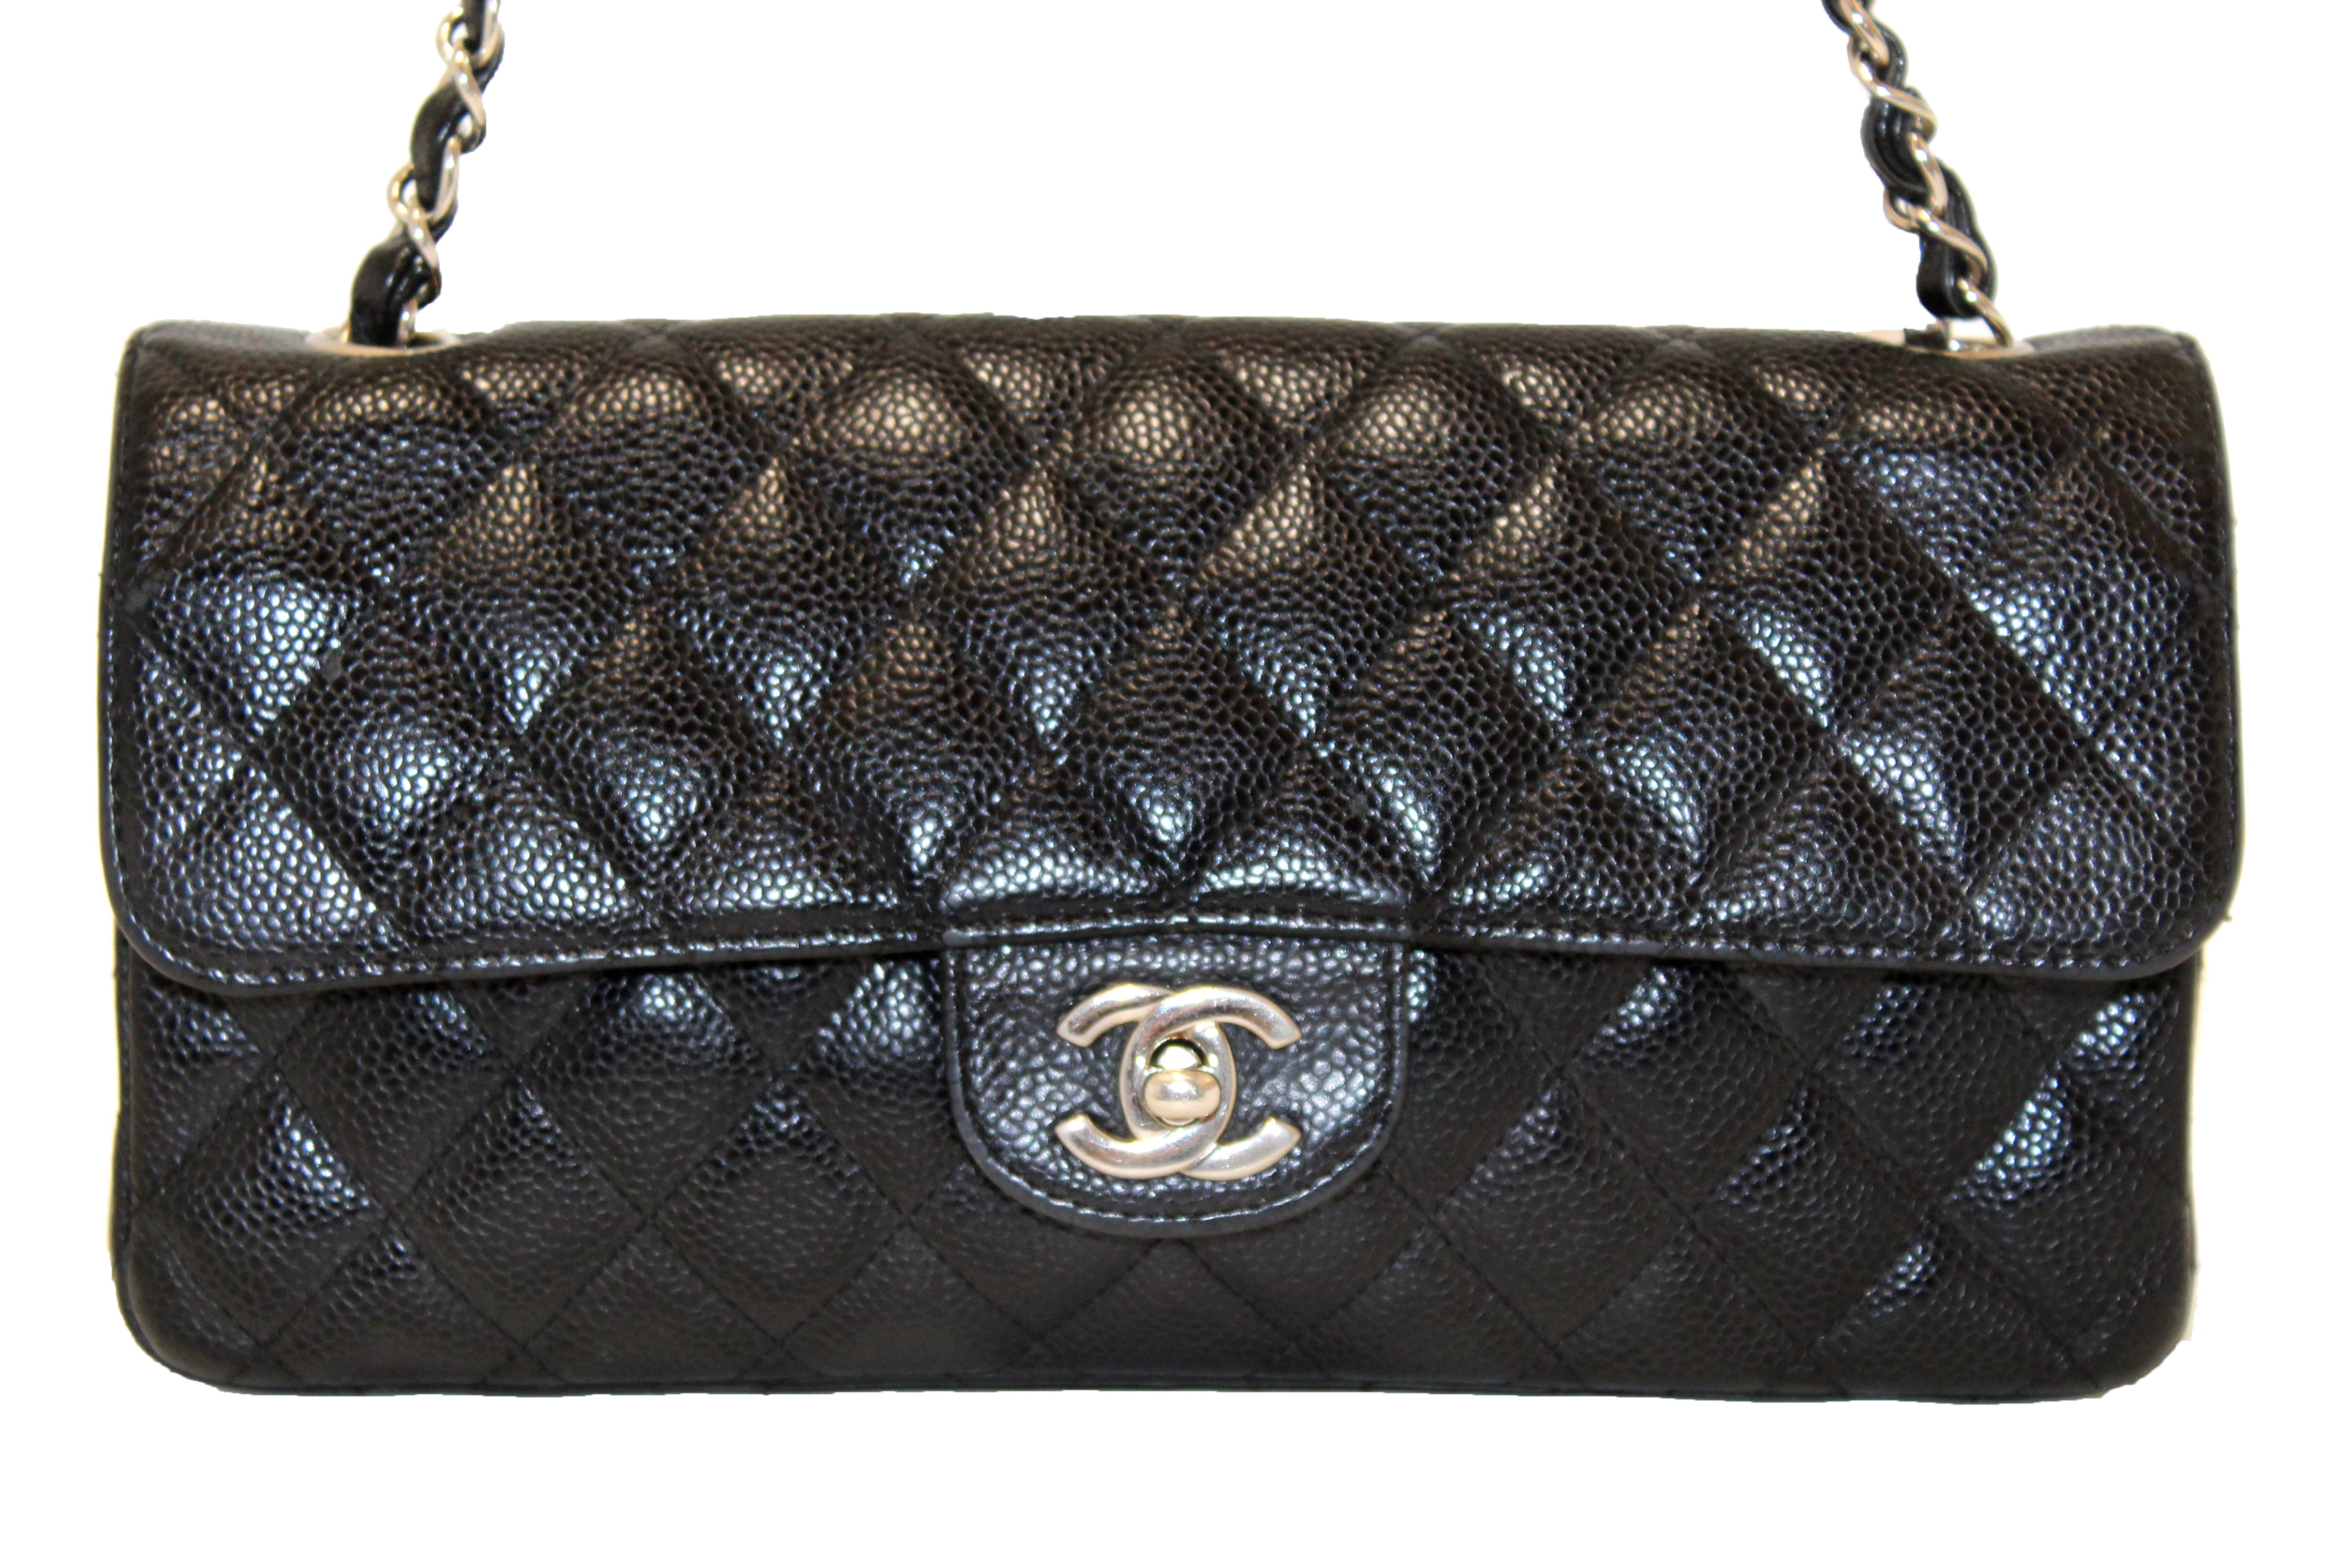 Chanel 2019 Quilted Small Flap Bag Black Grained Calfskin Leather Crossbody